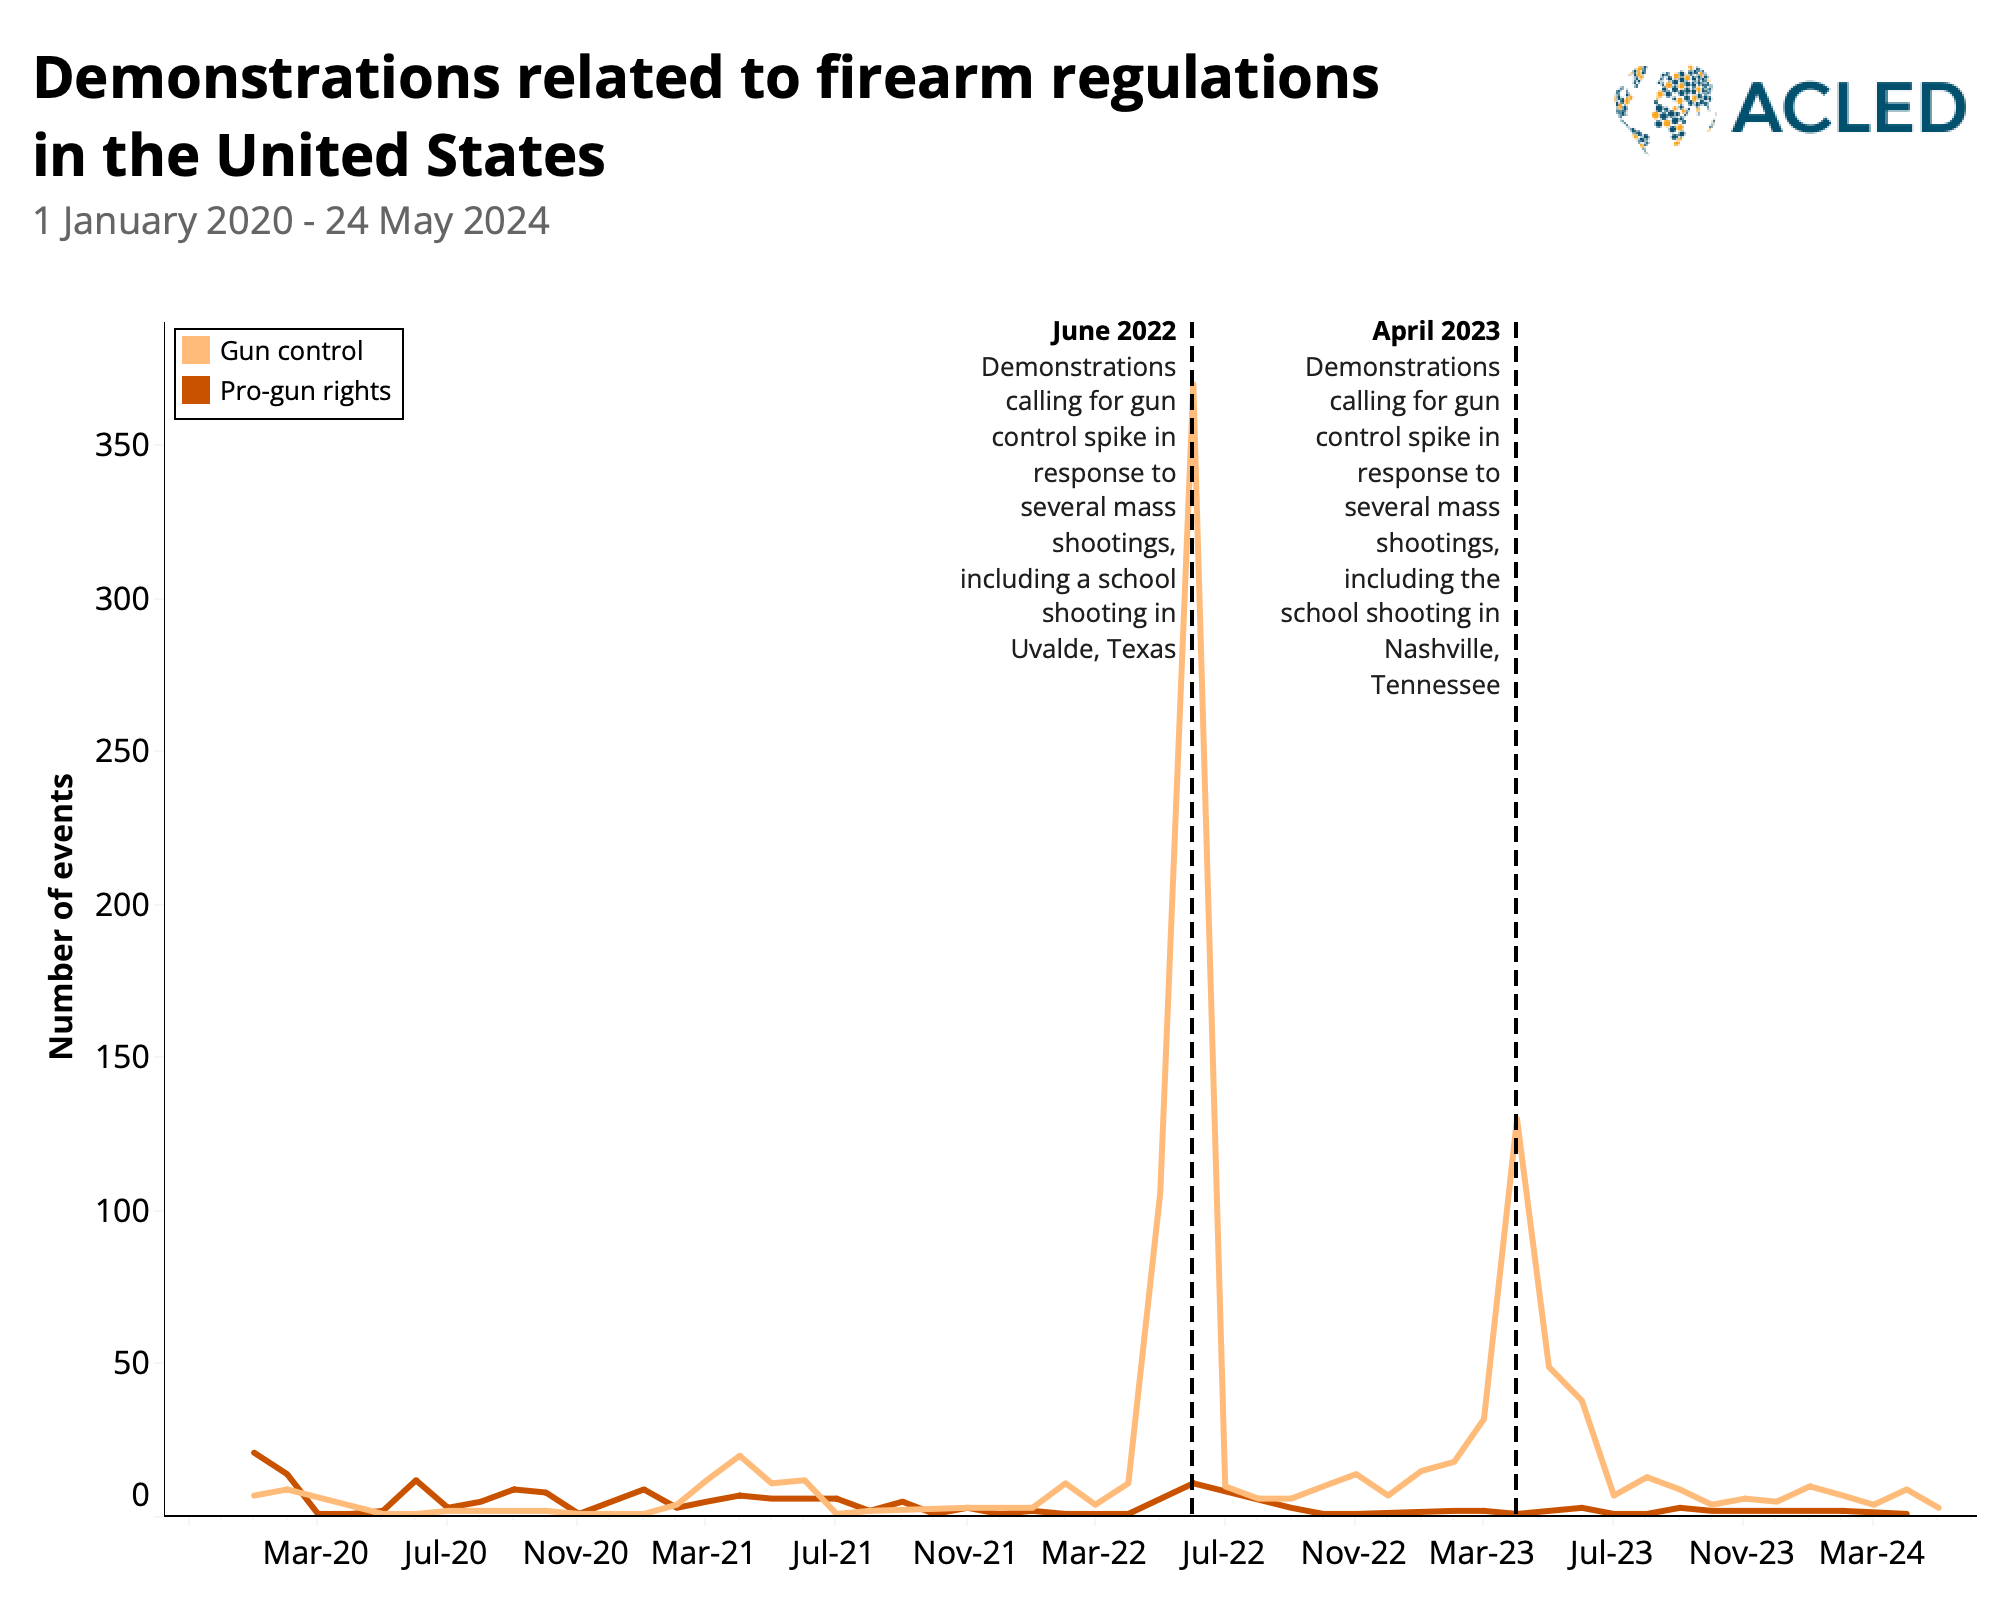 Line chart - Demonstrations related to firearm regulations in the United States - 1 January 2020 - 24 May 2024